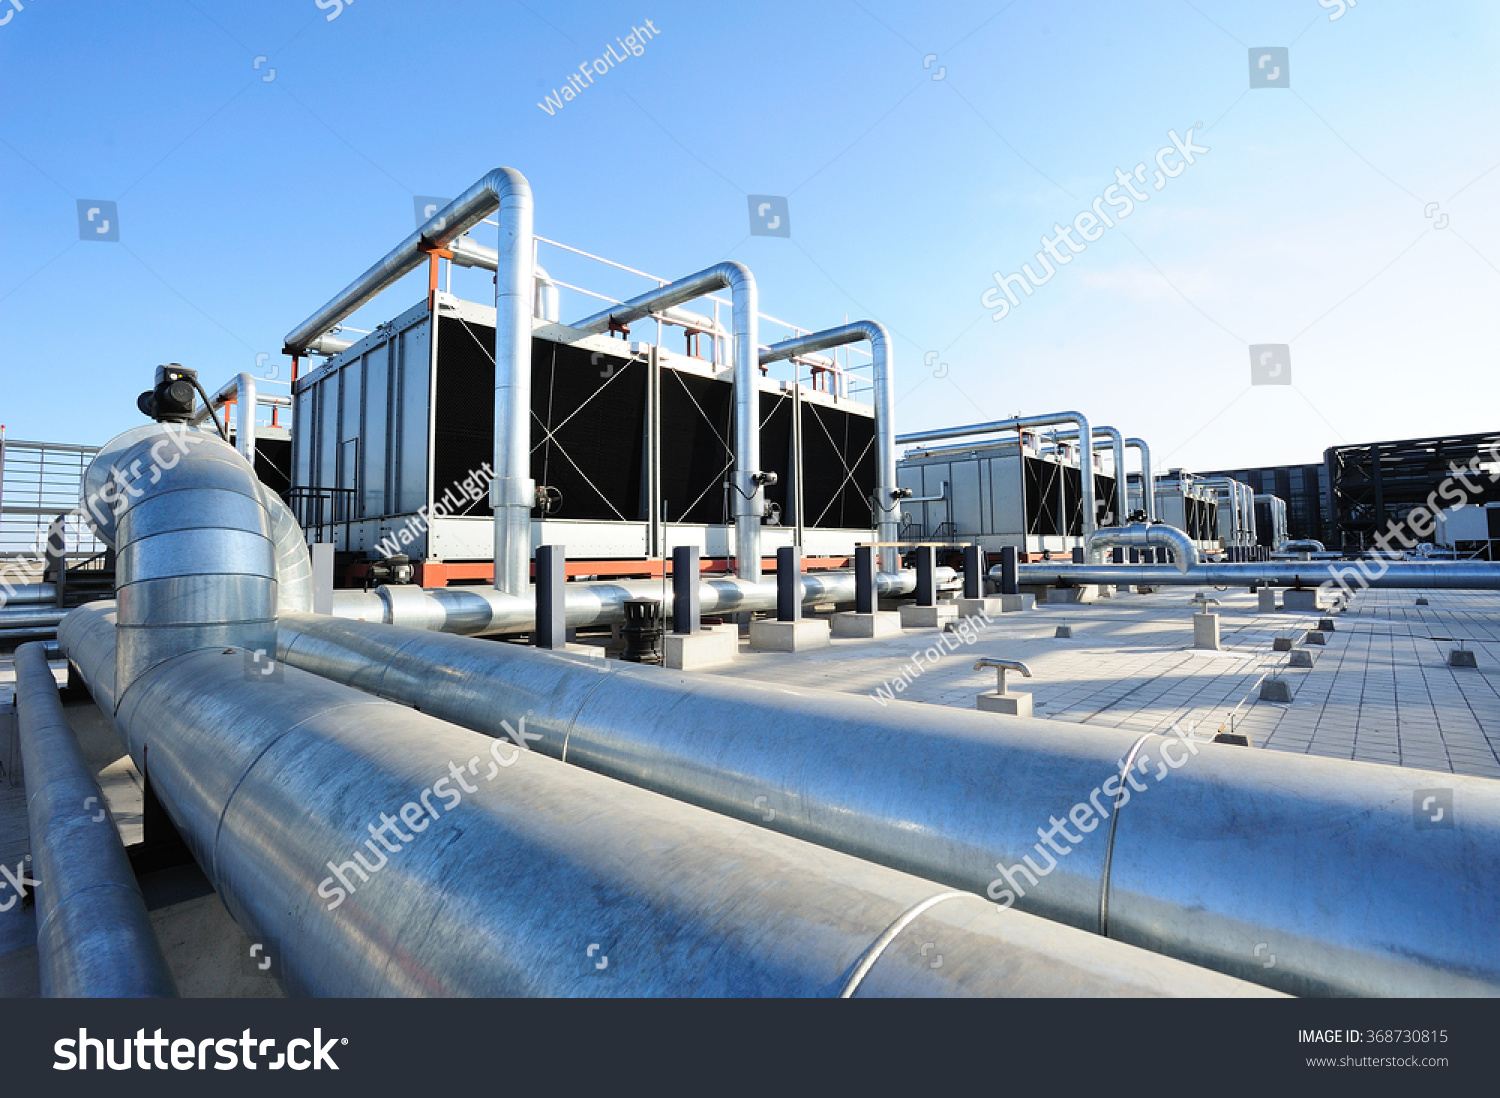 Sets of cooling towers in data center building. #368730815